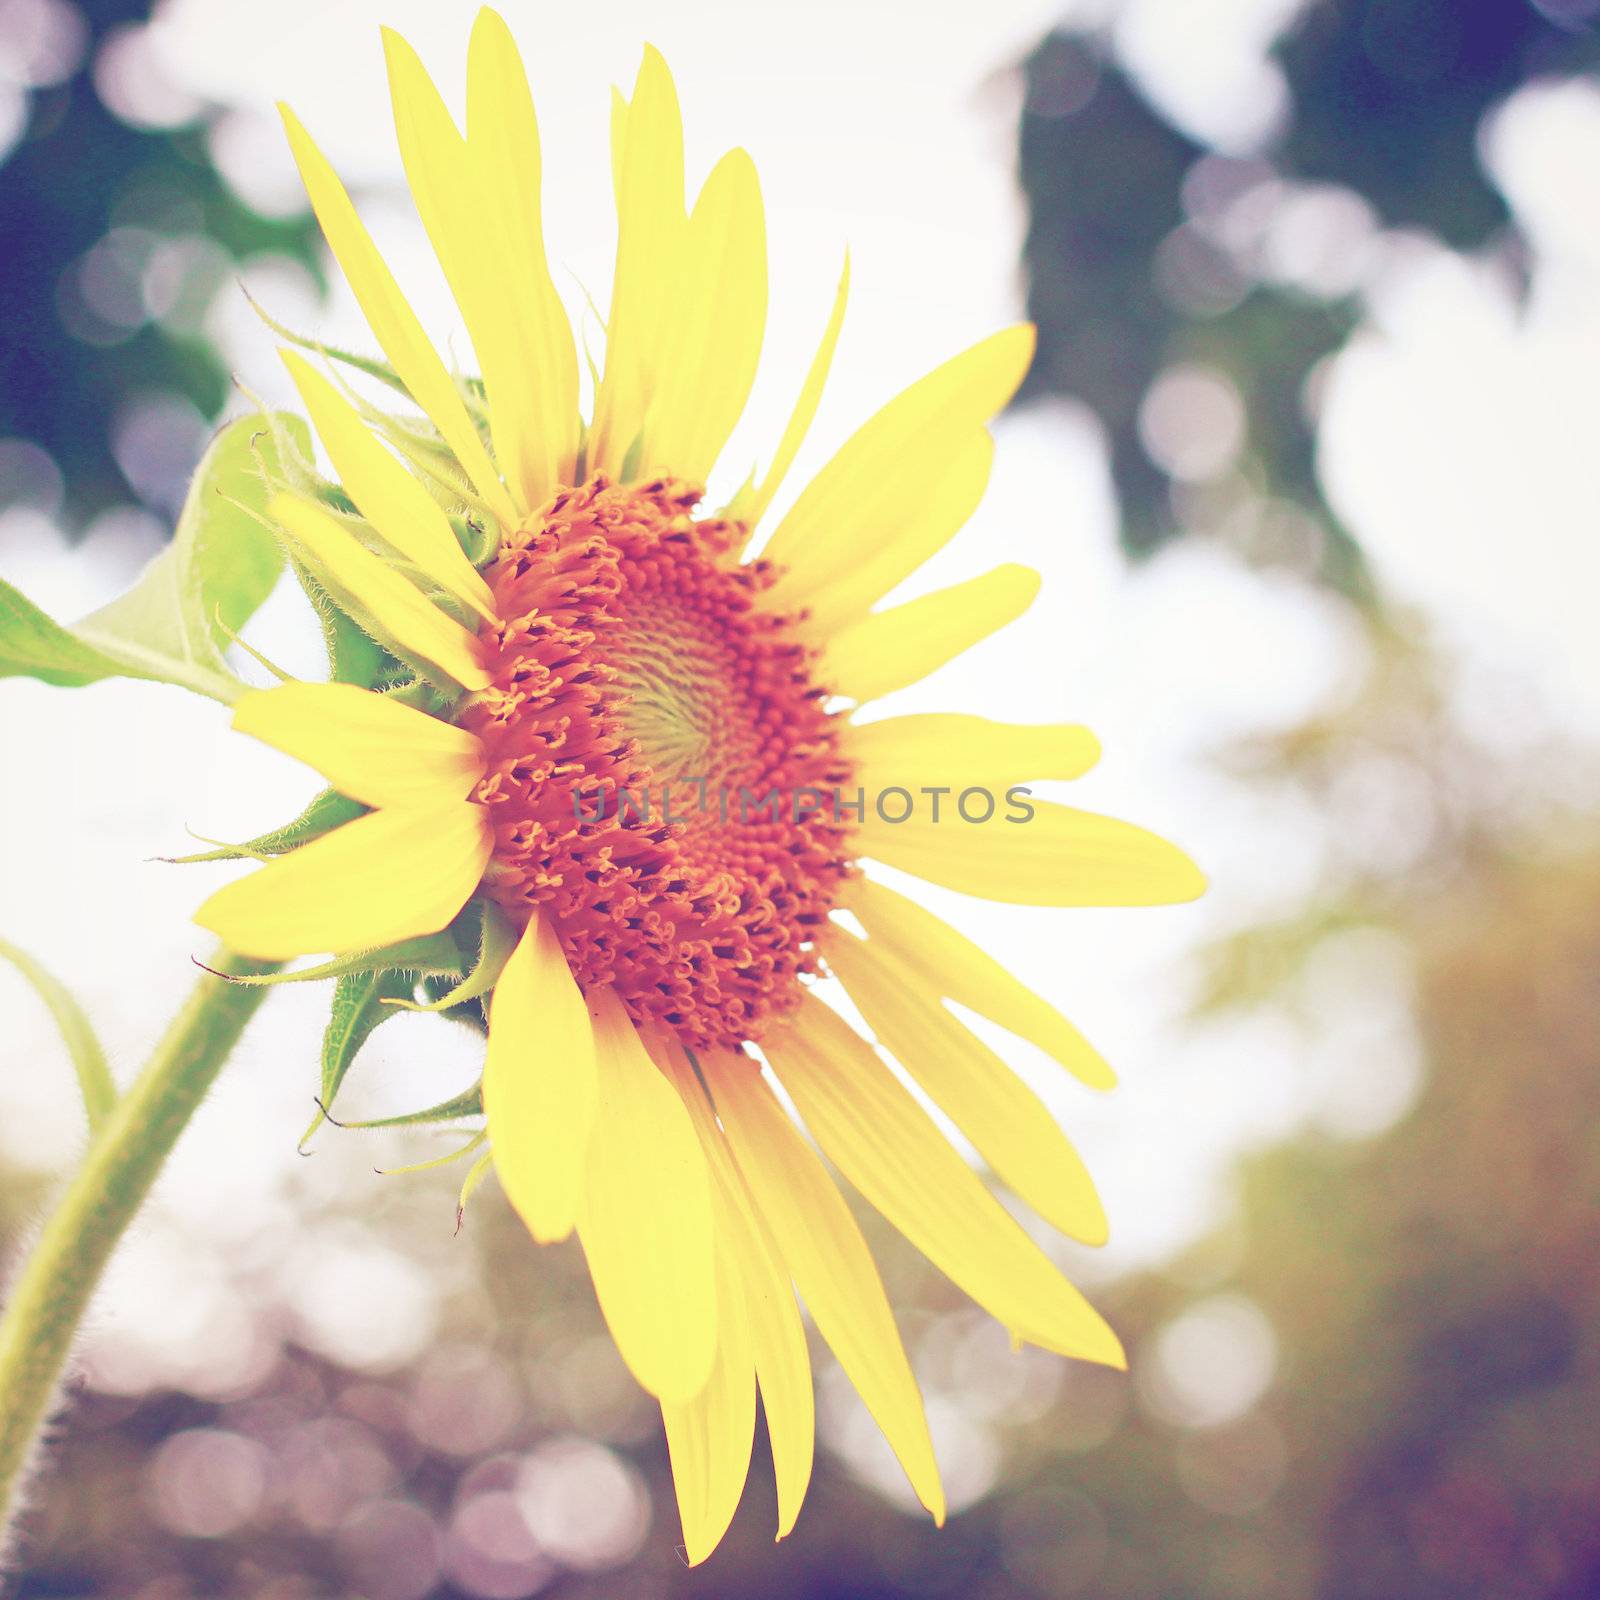 Close-up of sun flower with retro filter effect by nuchylee